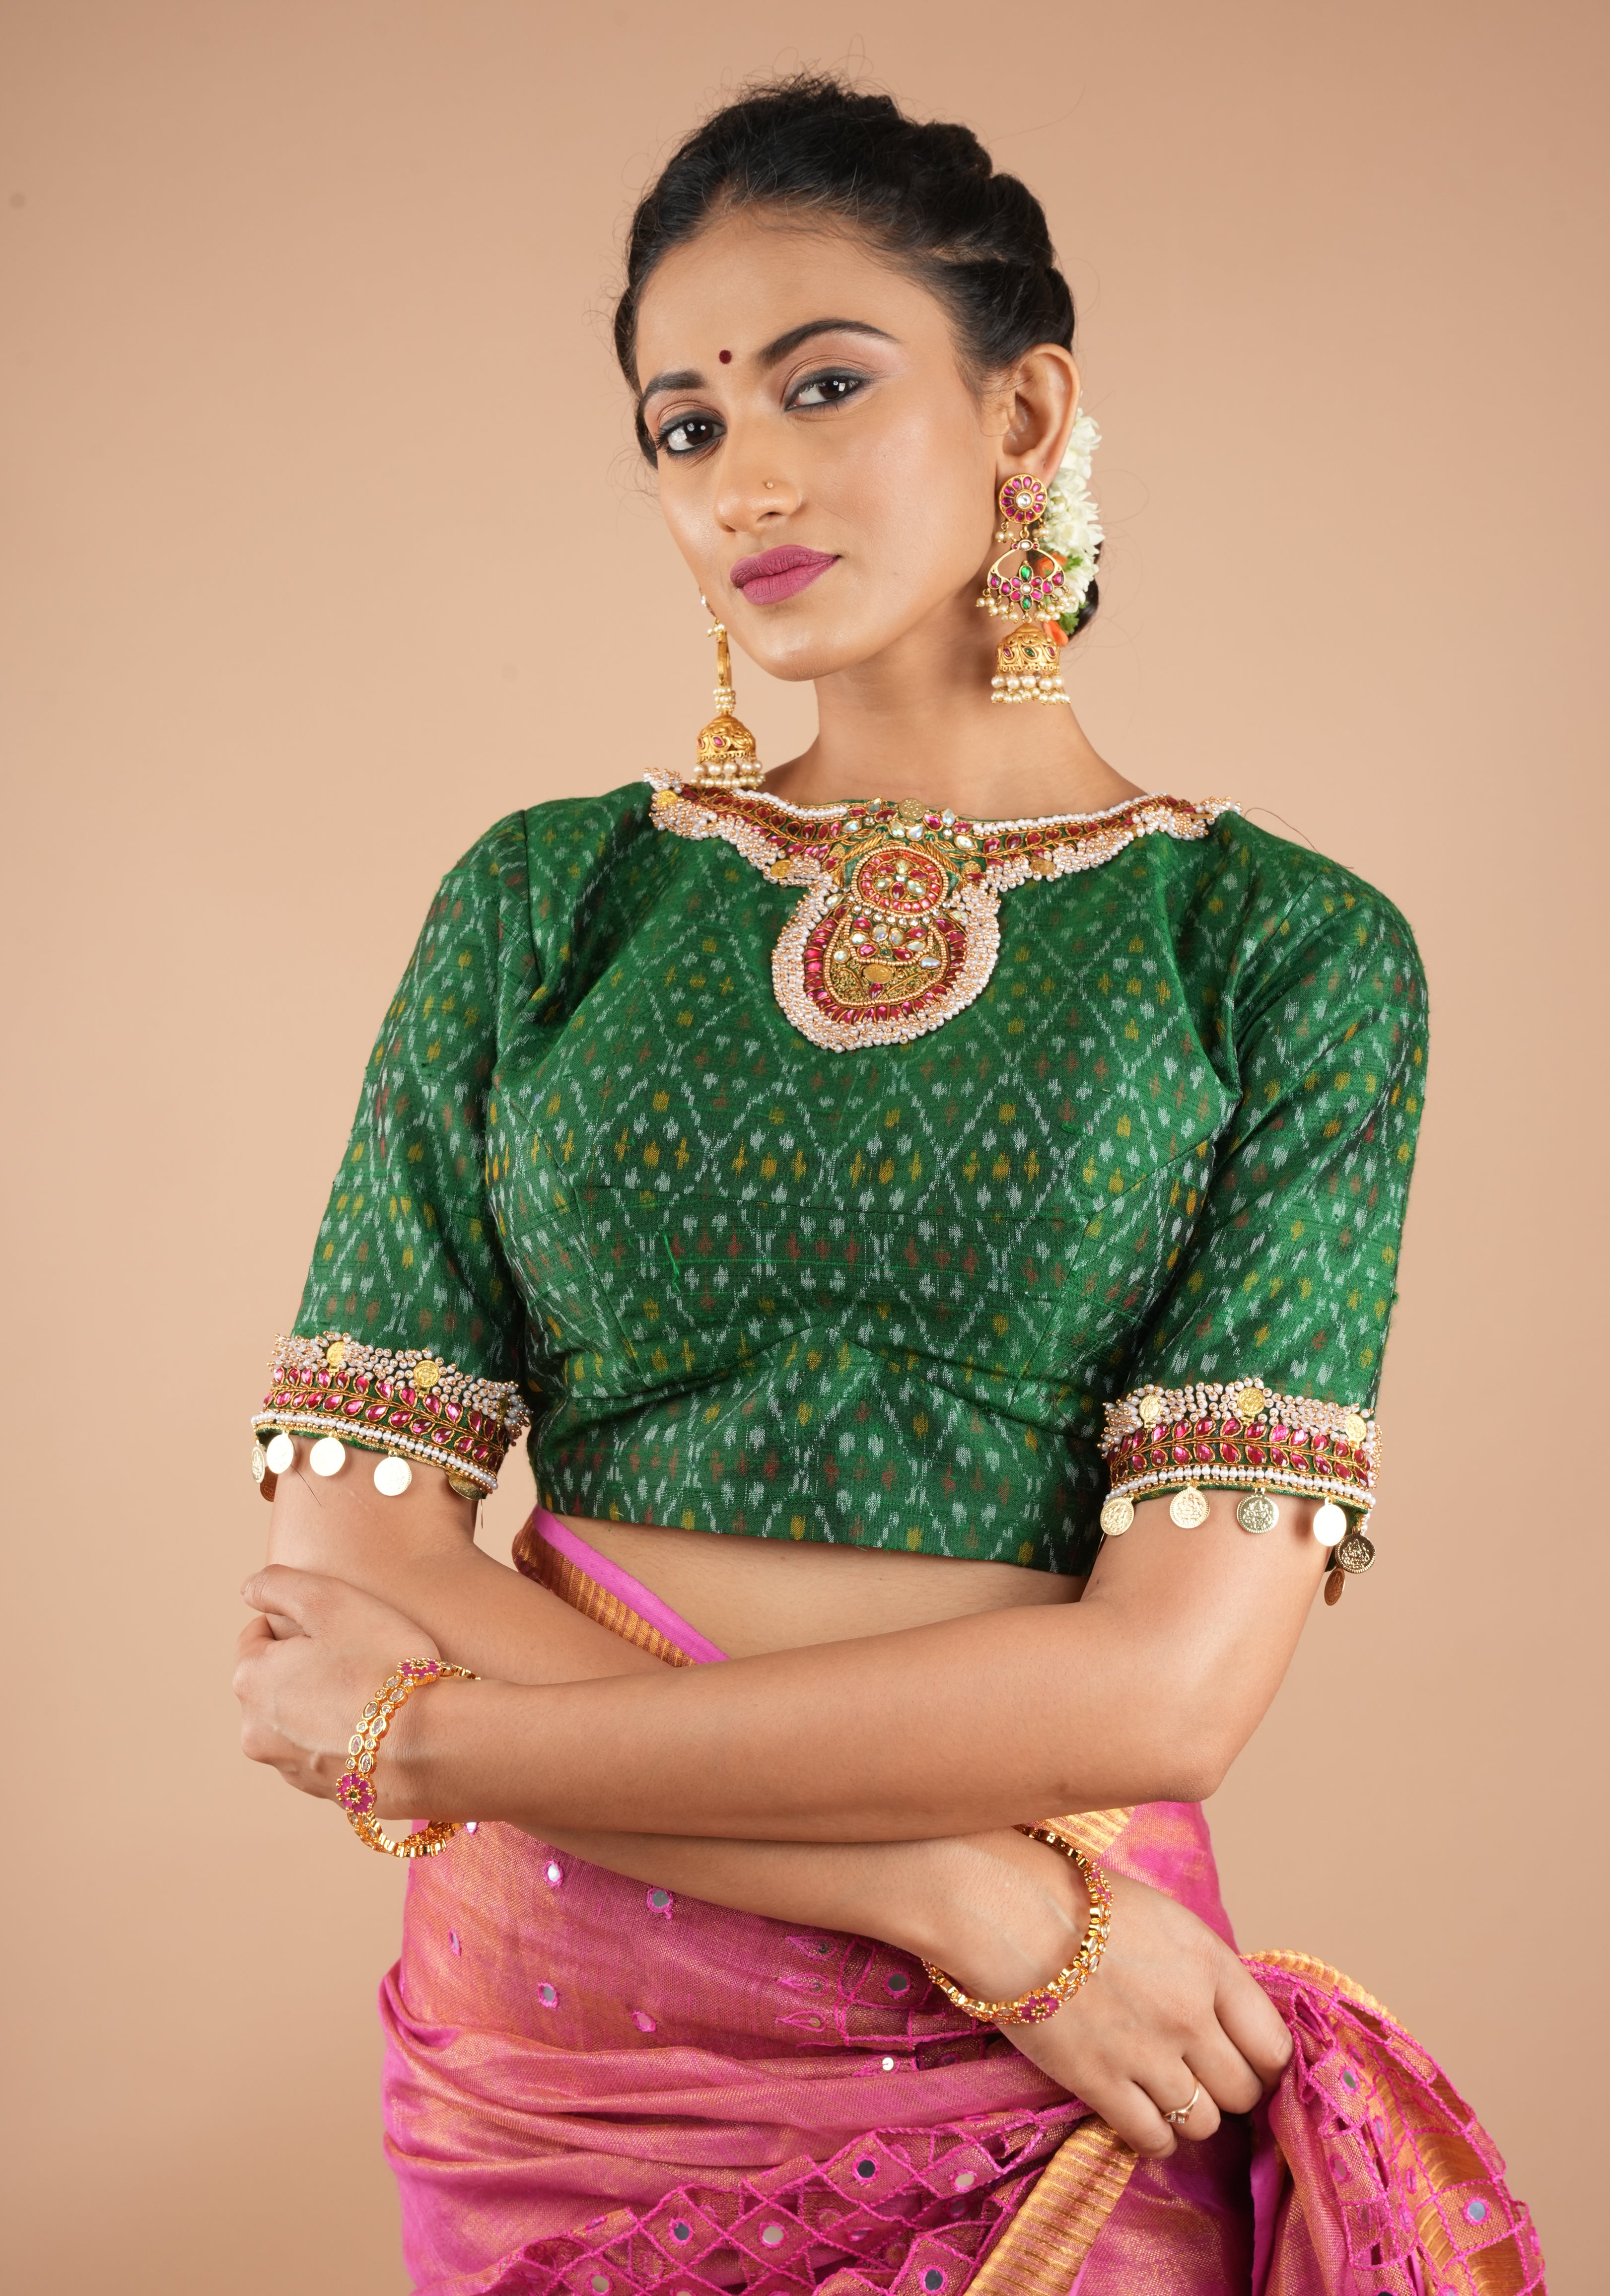 Green Ikkat Pure Raw Silk Blouse with Kemp and Moti Necklace and Bajuband design Handwork, Made to Order, Customizable